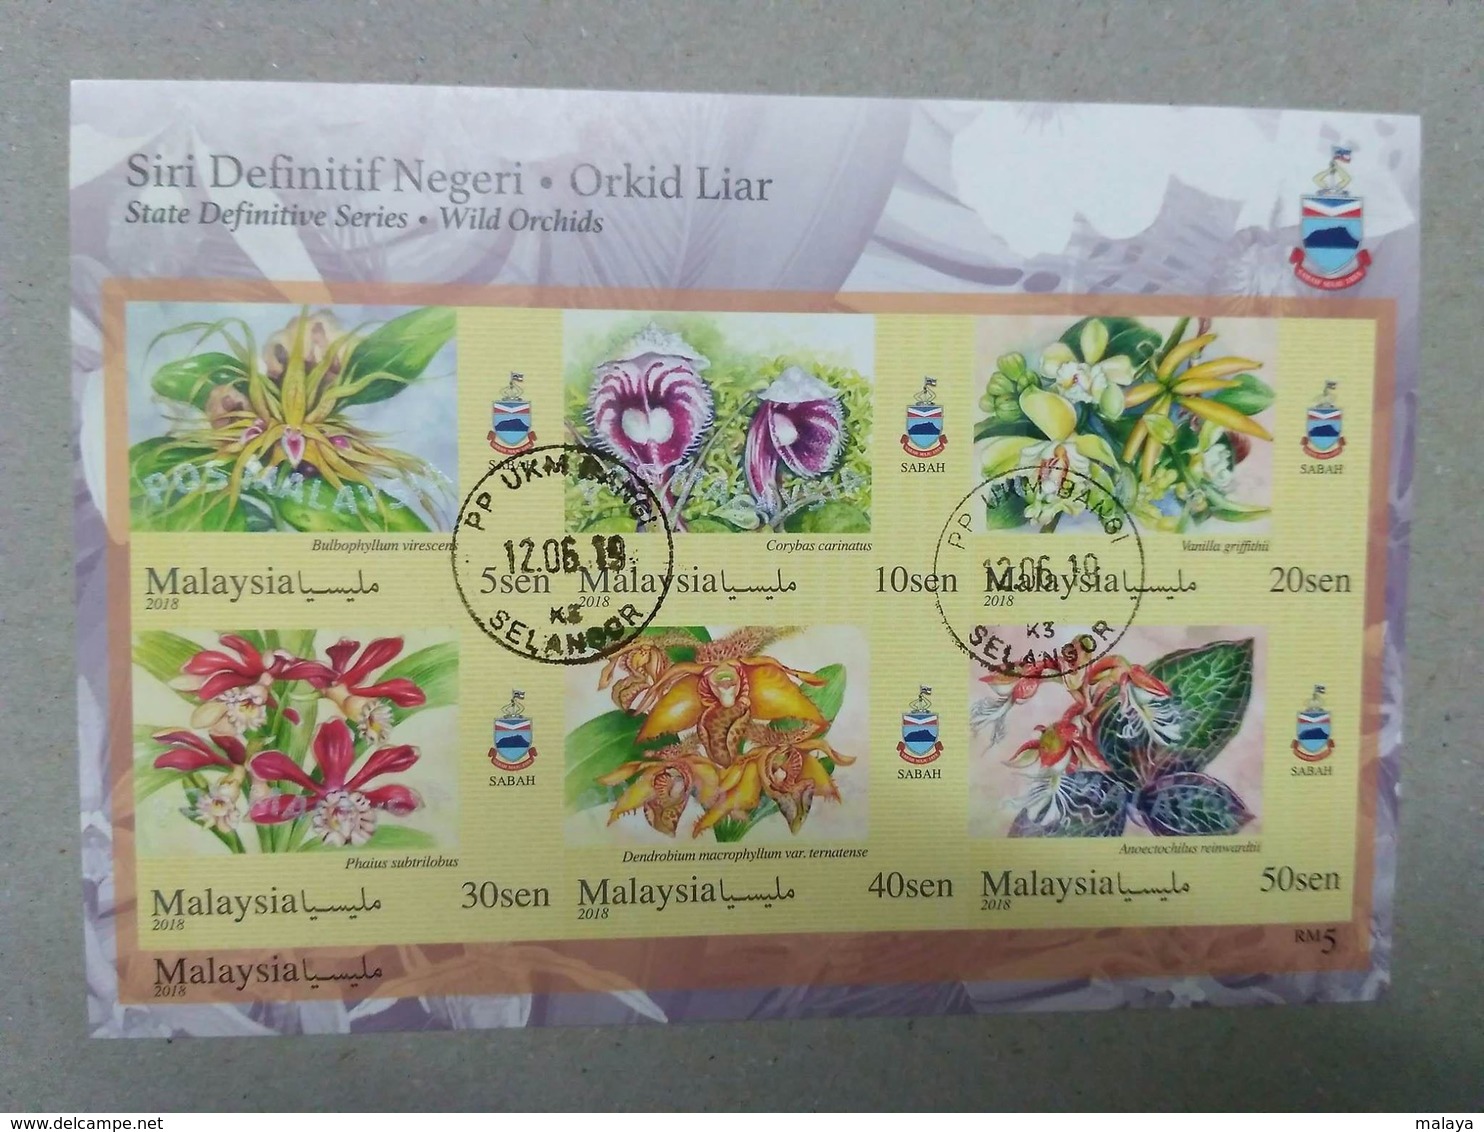 MALAYSIA 2018 Sabah Borneo WILD ORCHIDS Definitive State Series MS Stamps IMPerf Used - Malaysia (1964-...)